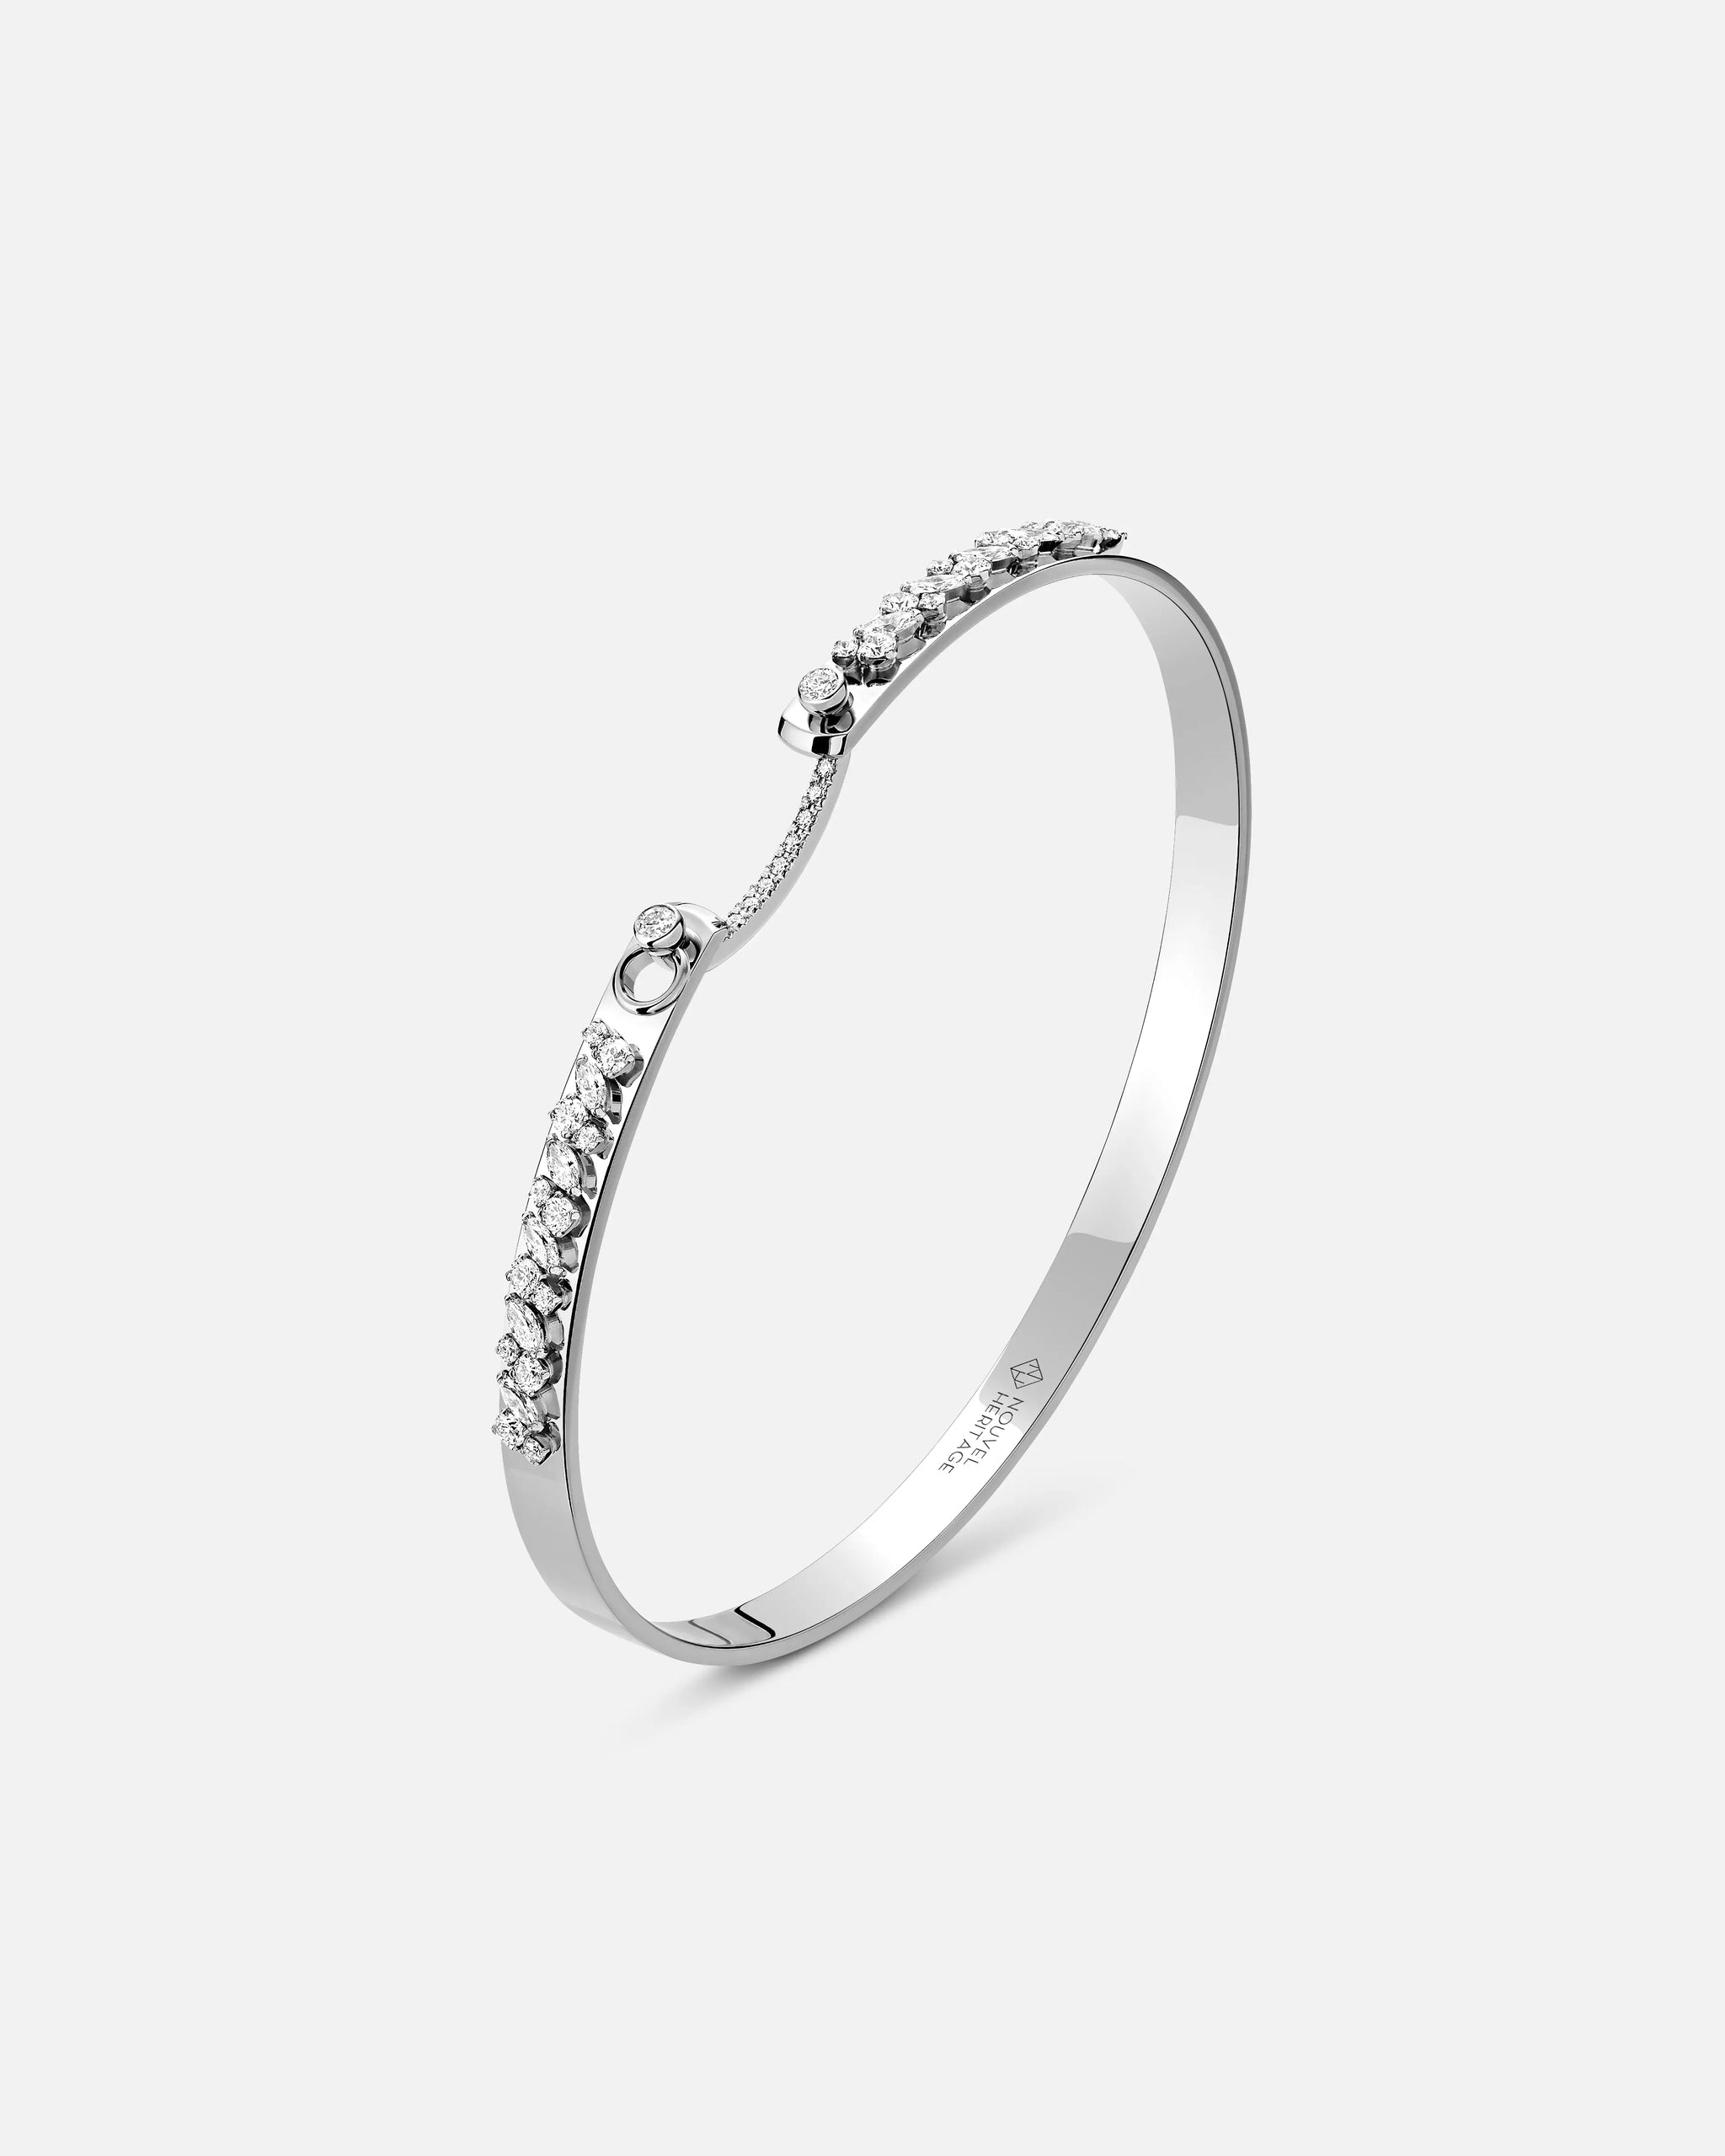 Under the Stars Mood Bangle in White Gold - 1 - Nouvel Heritage